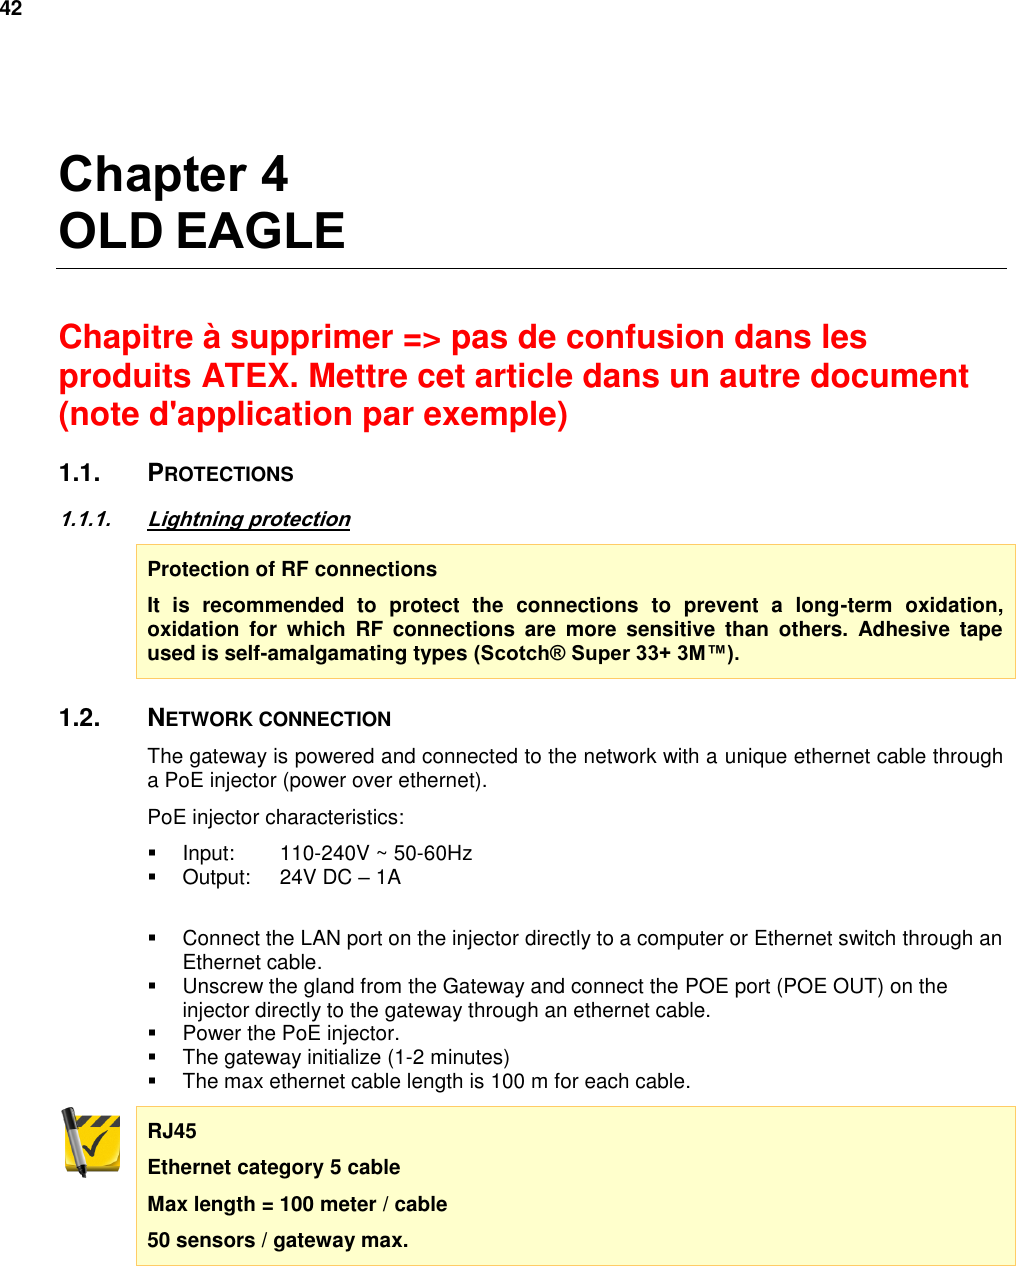 42   Chapter 4 OLD EAGLE  Chapitre à supprimer =&gt; pas de confusion dans les produits ATEX. Mettre cet article dans un autre document (note d&apos;application par exemple) 1.1.  PROTECTIONS 1.1.1. Lightning protection Protection of RF connections It  is  recommended  to  protect  the  connections  to  prevent  a  long-term  oxidation, oxidation  for  which  RF  connections  are  more  sensitive  than  others.  Adhesive  tape used is self-amalgamating types (Scotch® Super 33+ 3M™). 1.2.  NETWORK CONNECTION The gateway is powered and connected to the network with a unique ethernet cable through a PoE injector (power over ethernet). PoE injector characteristics:   Input:  110-240V ~ 50-60Hz   Output:  24V DC – 1A    Connect the LAN port on the injector directly to a computer or Ethernet switch through an Ethernet cable.   Unscrew the gland from the Gateway and connect the POE port (POE OUT) on the injector directly to the gateway through an ethernet cable.   Power the PoE injector.   The gateway initialize (1-2 minutes)   The max ethernet cable length is 100 m for each cable. RJ45 Ethernet category 5 cable Max length = 100 meter / cable 50 sensors / gateway max.   